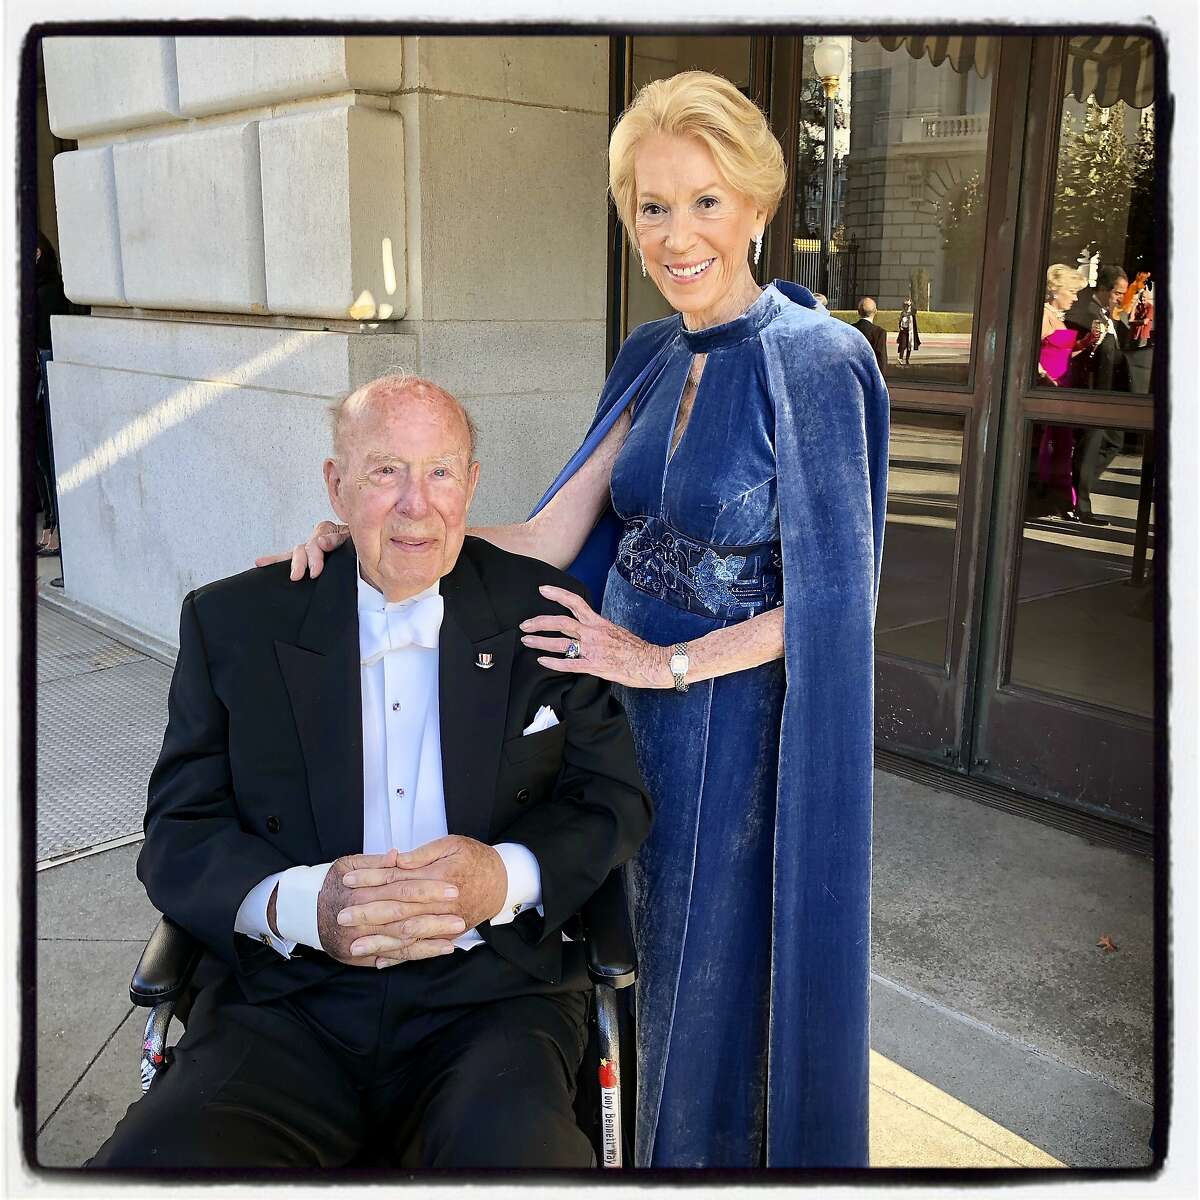 Former Sec. of State George Shultz and his wife, Protocol Chief Charlotte Shultz at the Opera Ball. Sept. 6, 2019